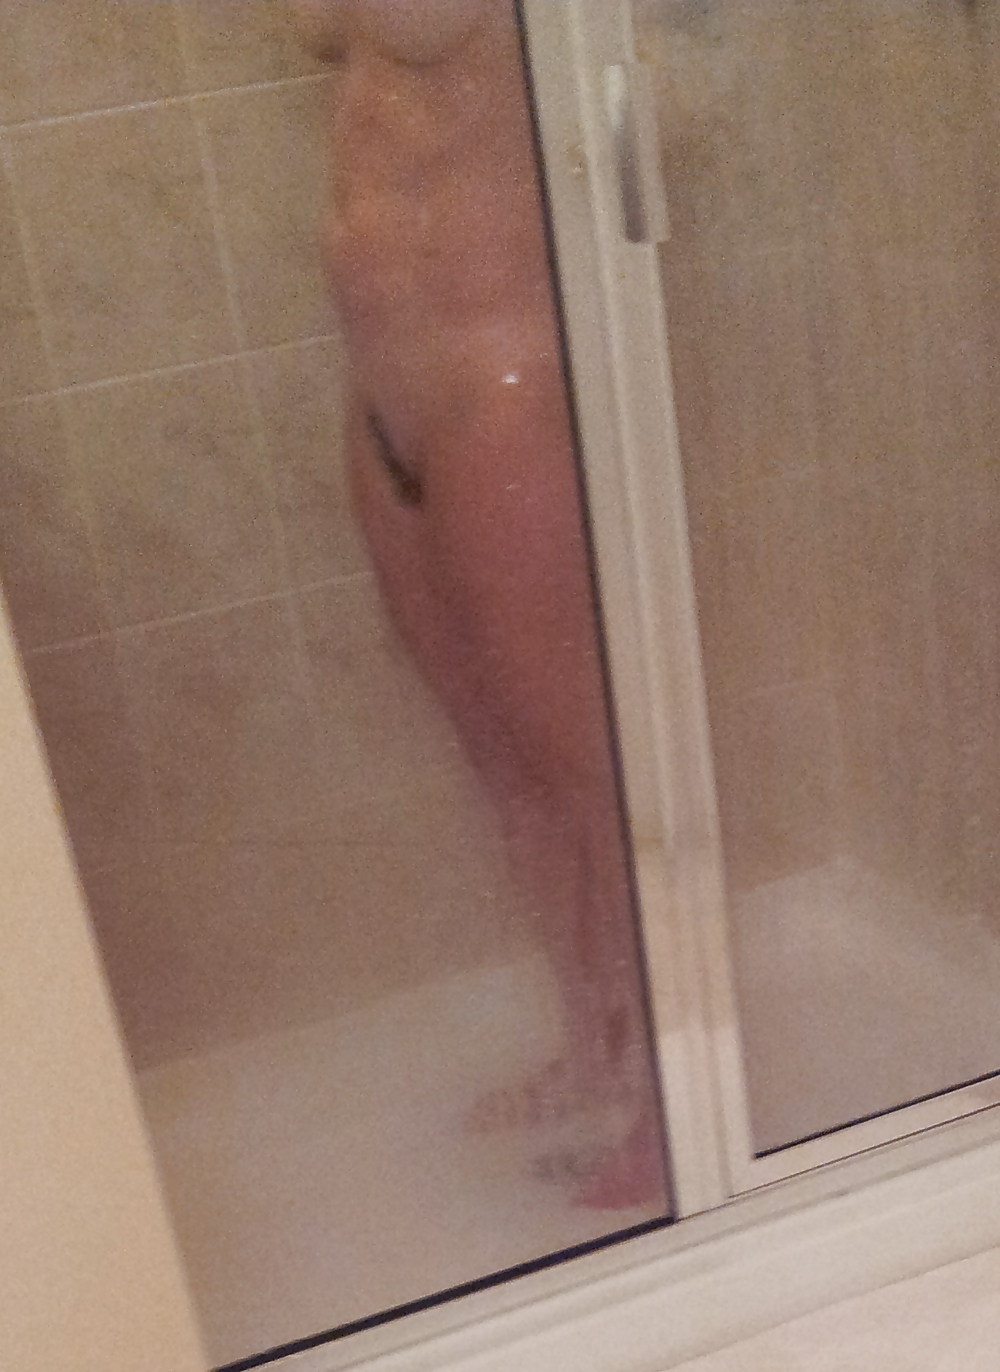 More Shower Photos of My Wife 6 #35623264